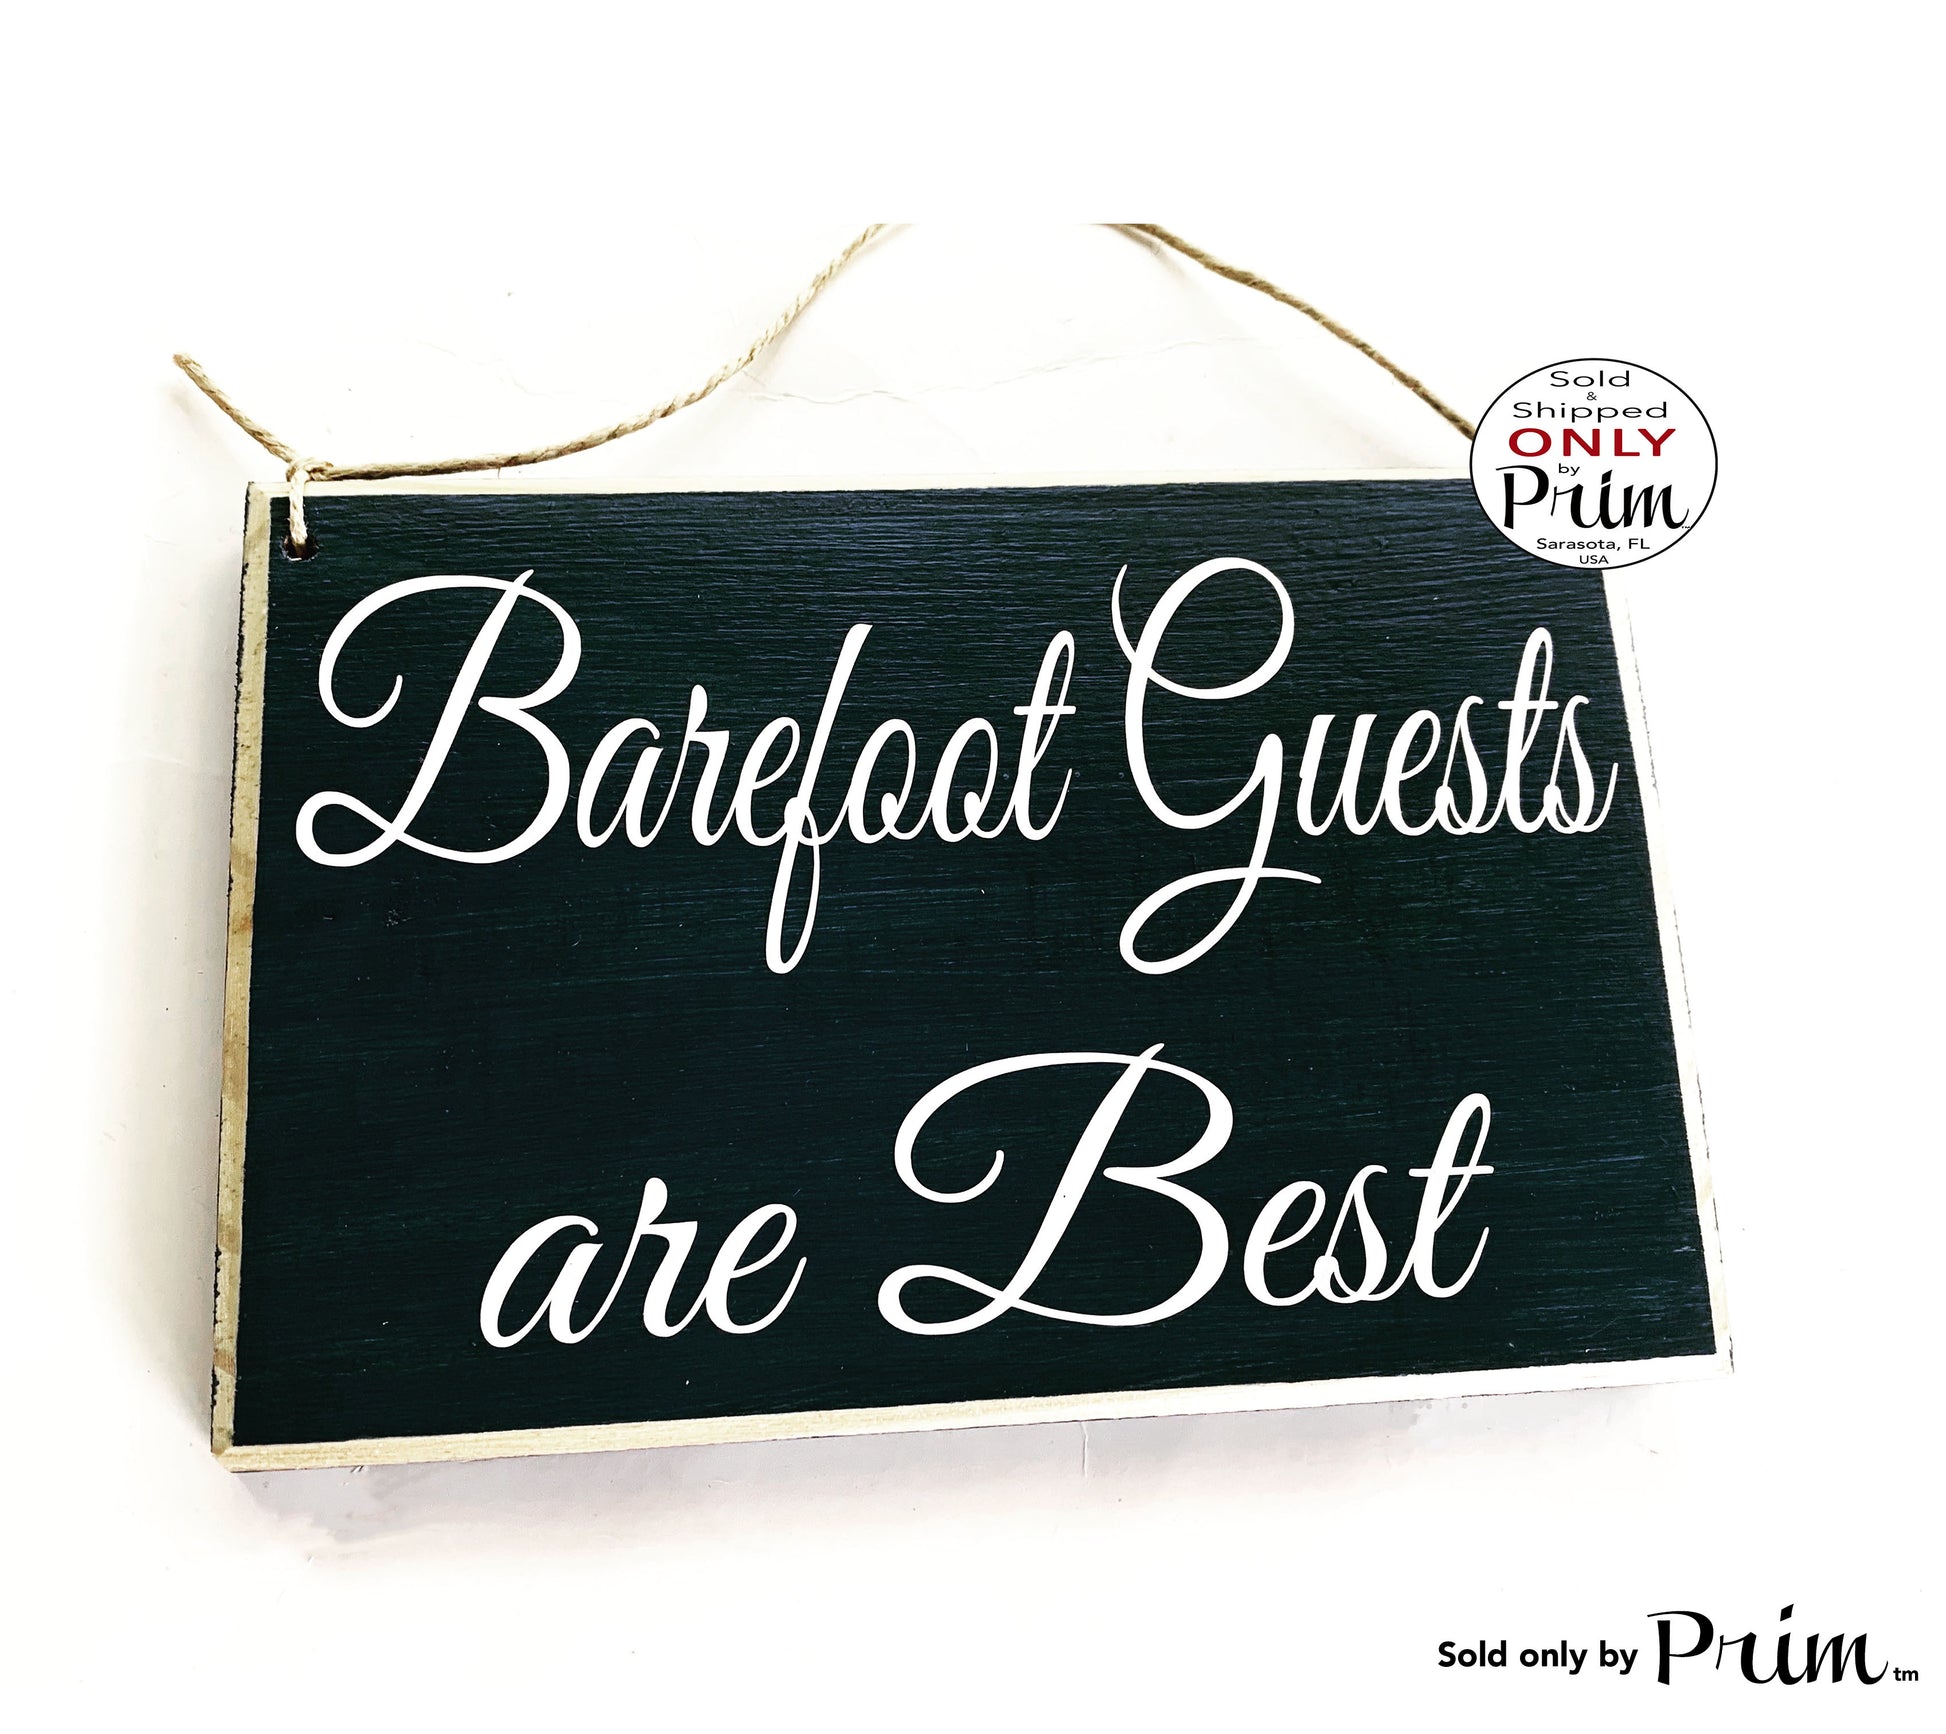 8x6 Barefoot Guests are the Best House Entrance (Choose Color) Custom Wood Sign Welcome Suite Cottage Bed and Breakfast AirBnb